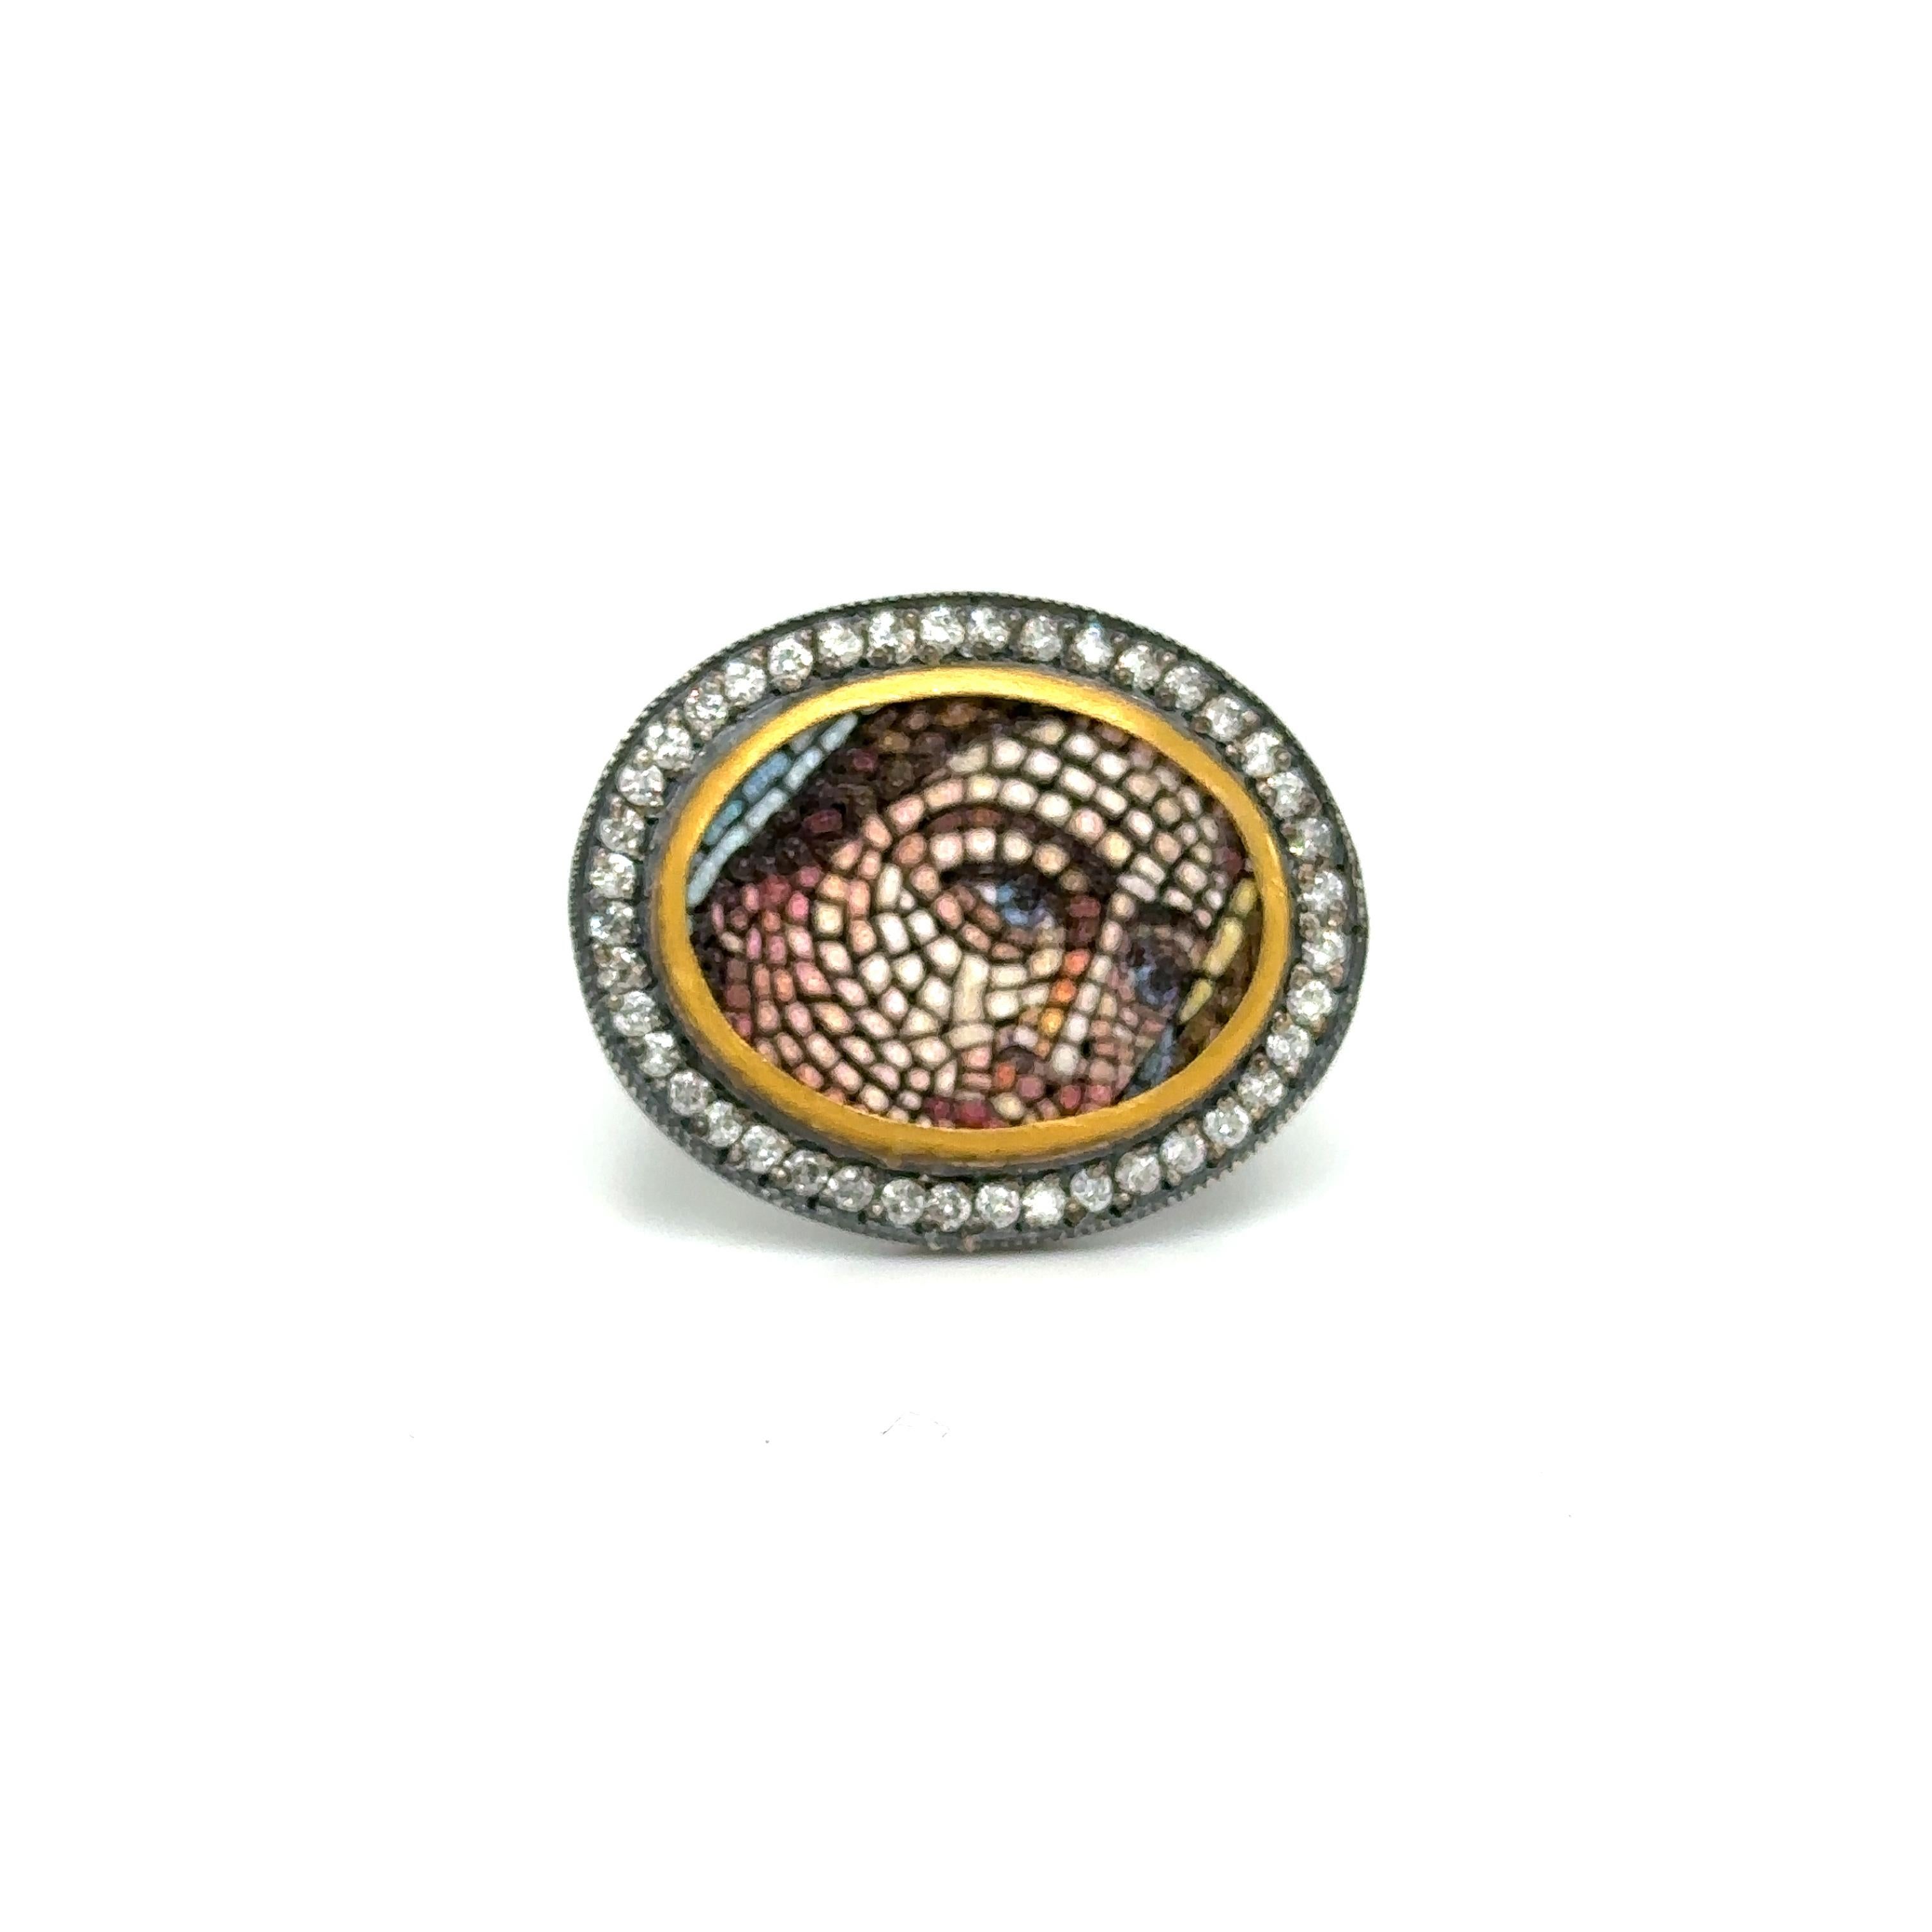 24KT GOLD/SS MICRO MOSAIC RING WITH 0.70 Ct DIAMONDS
Metal: 24K GOLD/OXIDIZED SS
Diamond Info: I/J Color SI1/2 Round Brilliant Diamonds
Total Ct Weight:    0.70 cwt.
Item Weight    11.90   gm
Ring Size:  8 (Re-sizable)
Measurements:  20.70 mm x